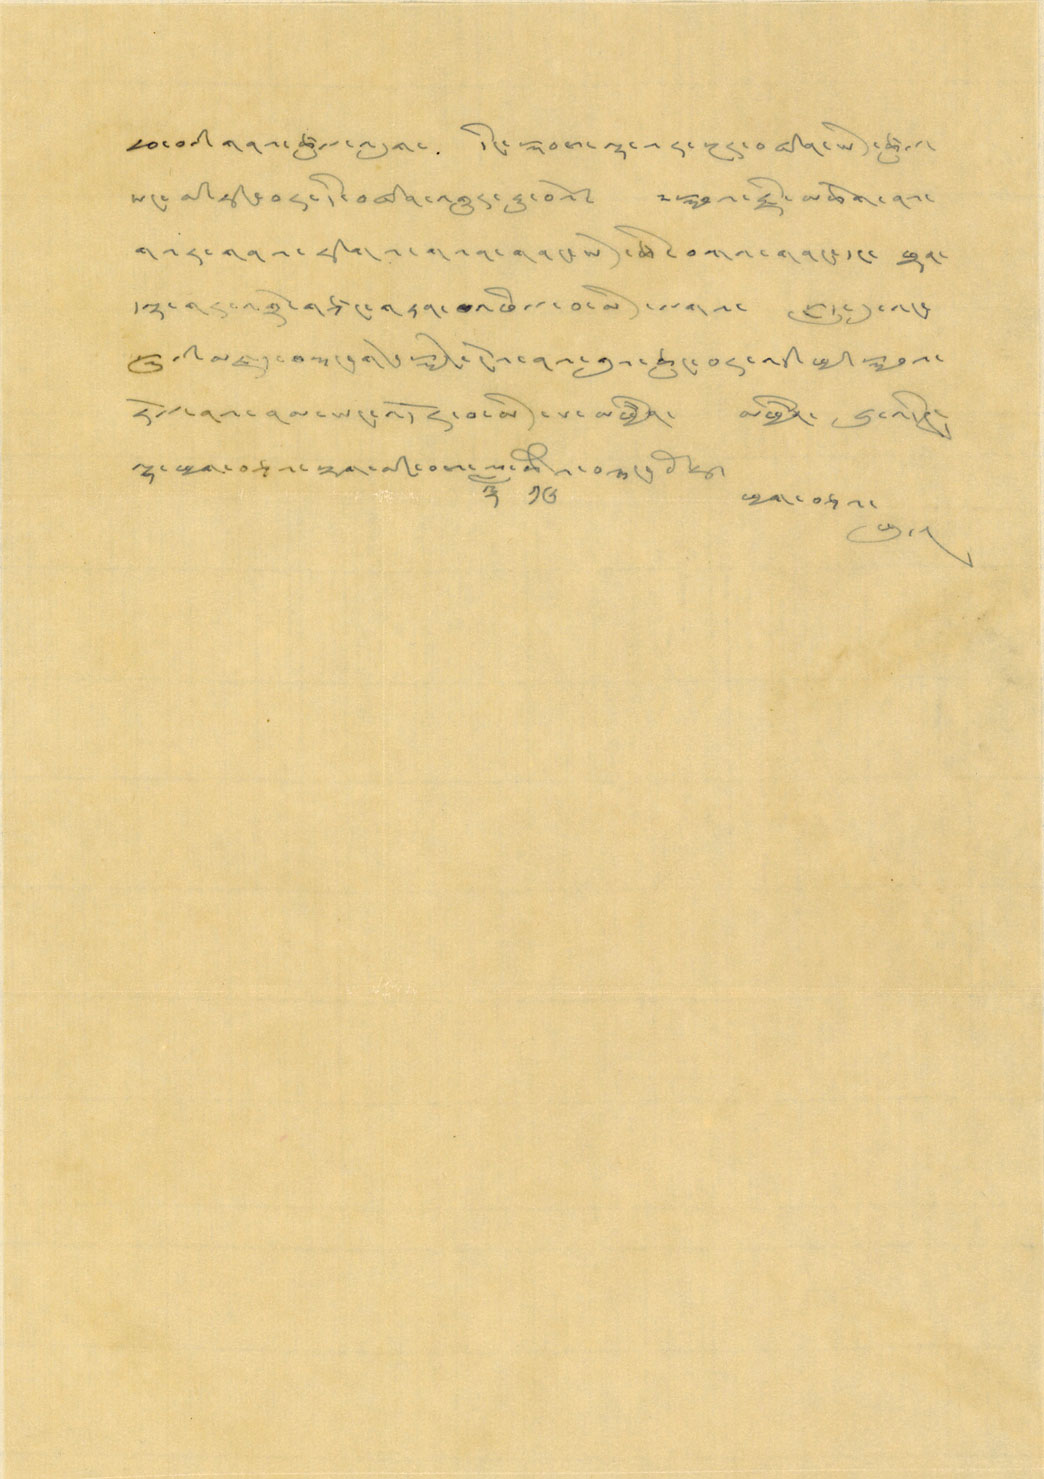 Letter from Thubten Jigme Norbu, eldest brother of the Fourteenth Dalai Lama, to the Seventh Changkya Khutukhtu, expressing concern for his health and briefing on the status the Kumbum Monastery and the political situation in Lhasa